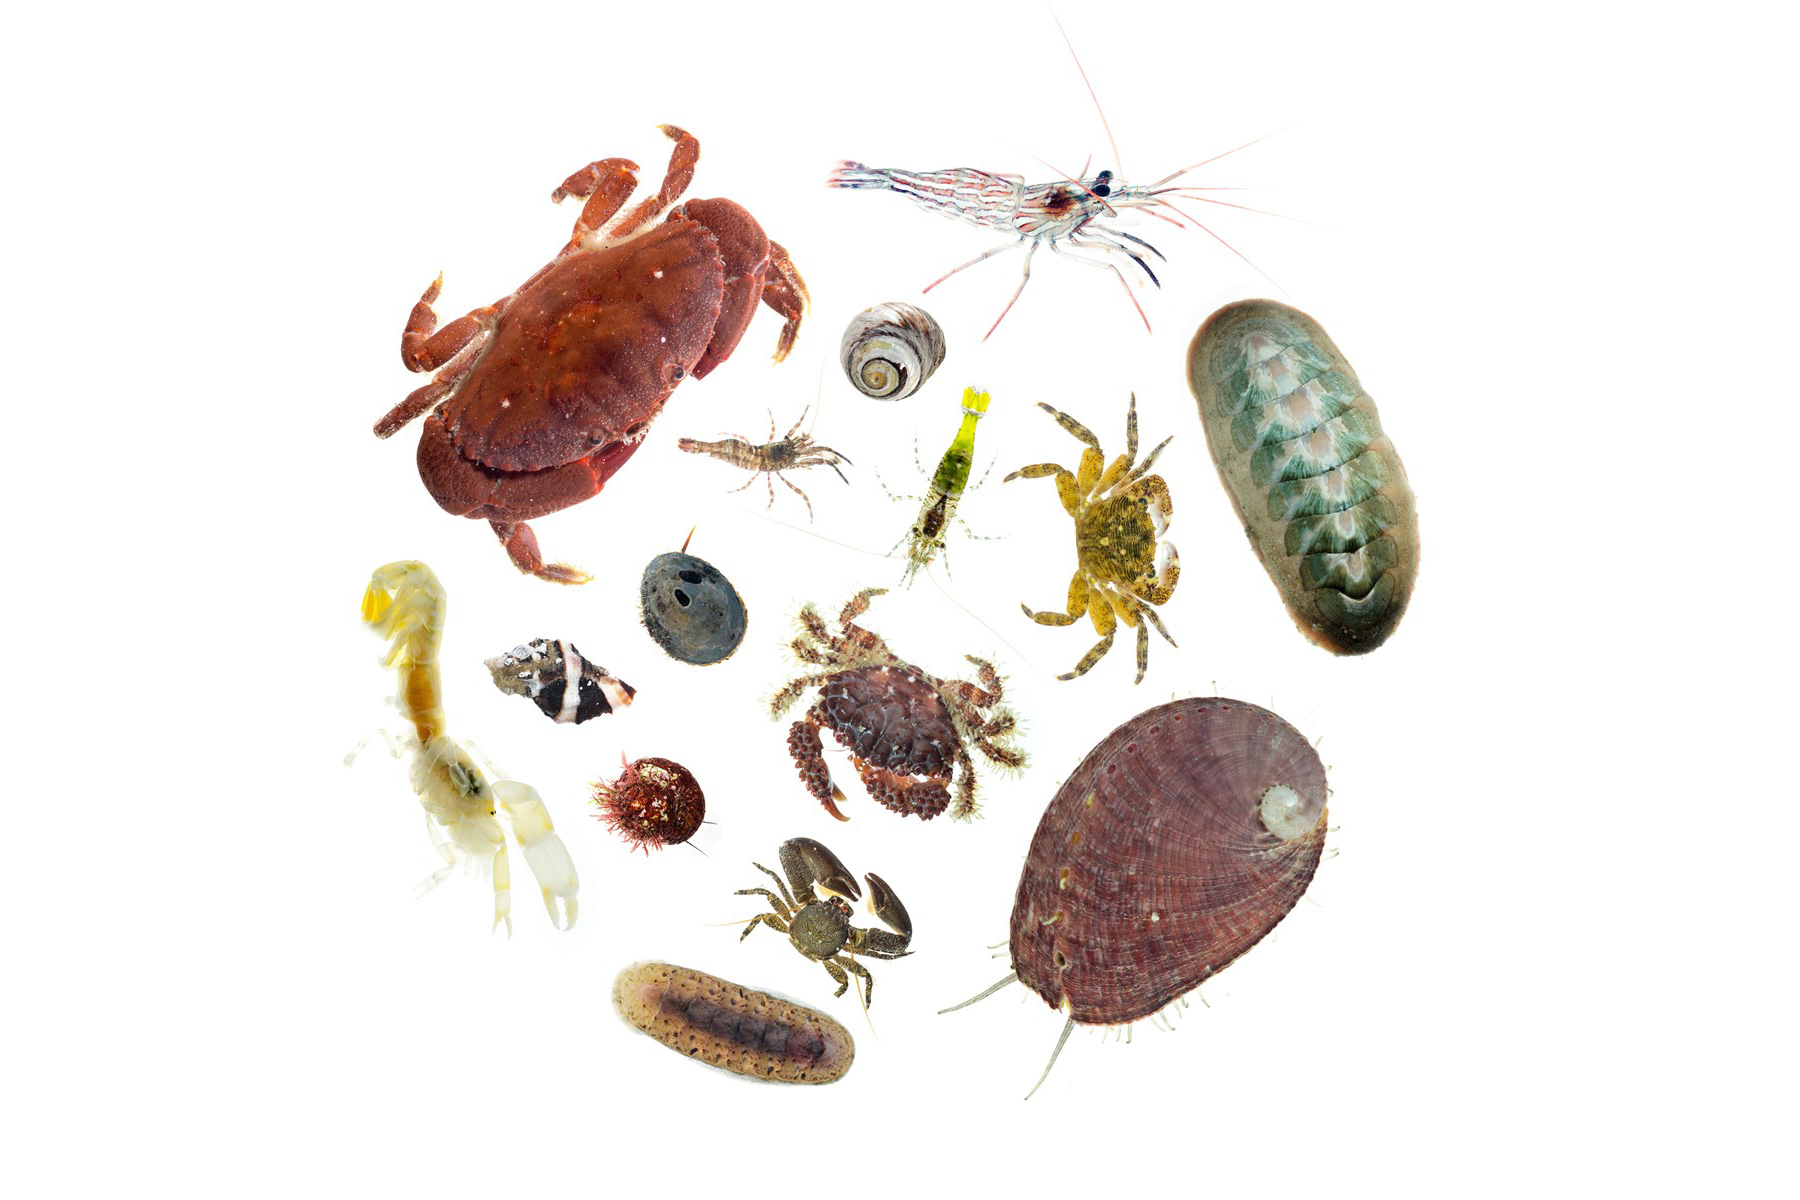 Collage of crabs, shrimp, snails, and chitons, each photographed against a white background. Each creature's form, color, and individuality shine through.